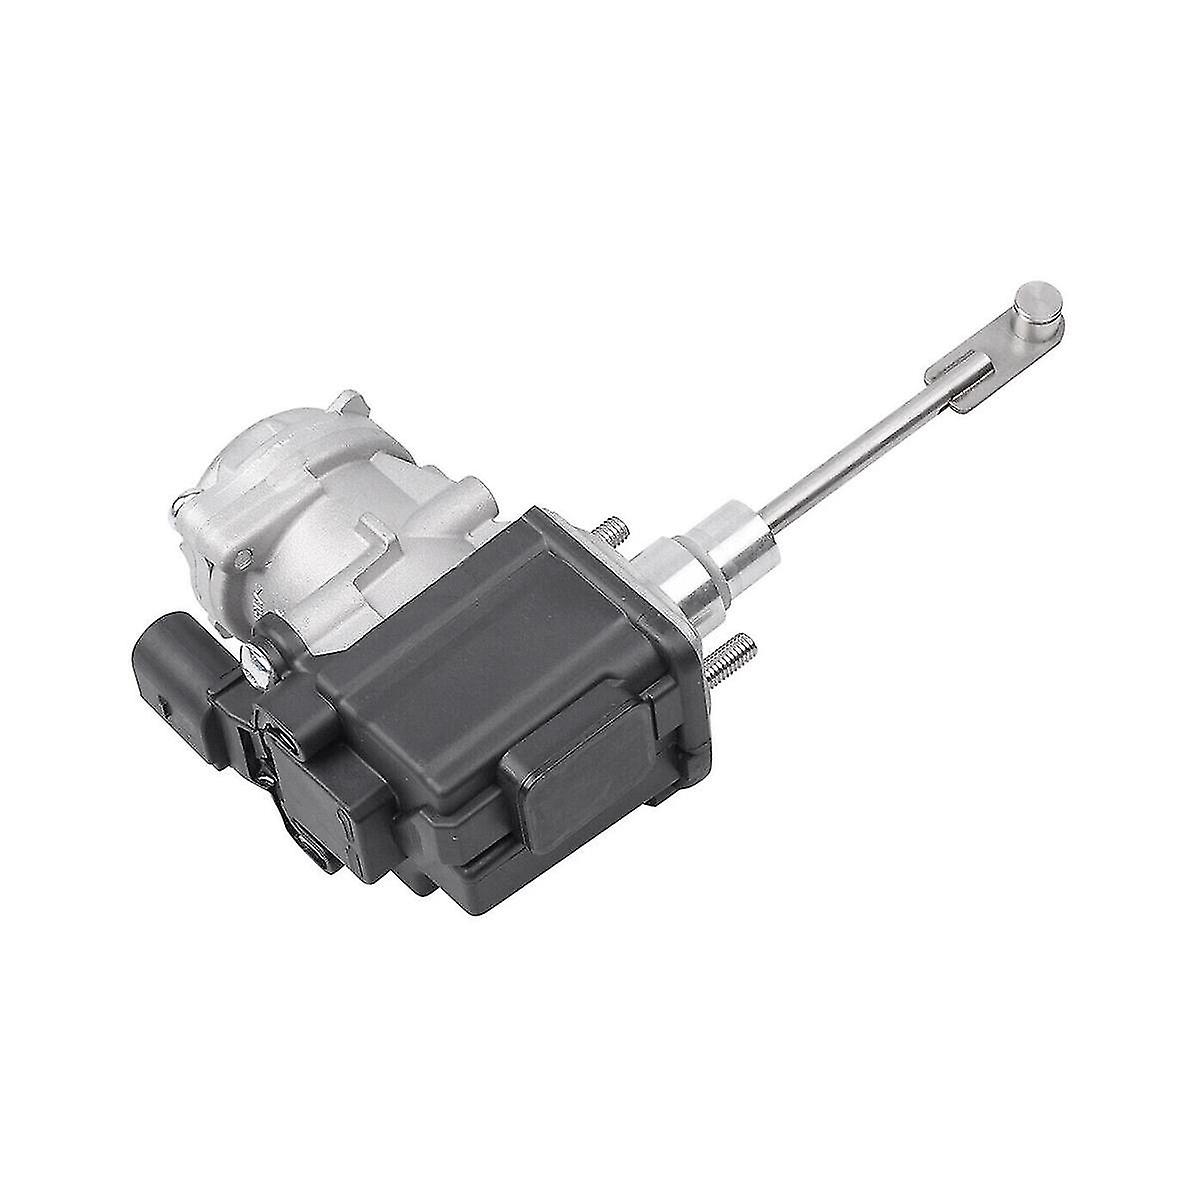 04e145725s Electronic Boost Turbocharger Actuator 04e145725ad For A1 A3 Q3 Seat Golf 1.4t Short